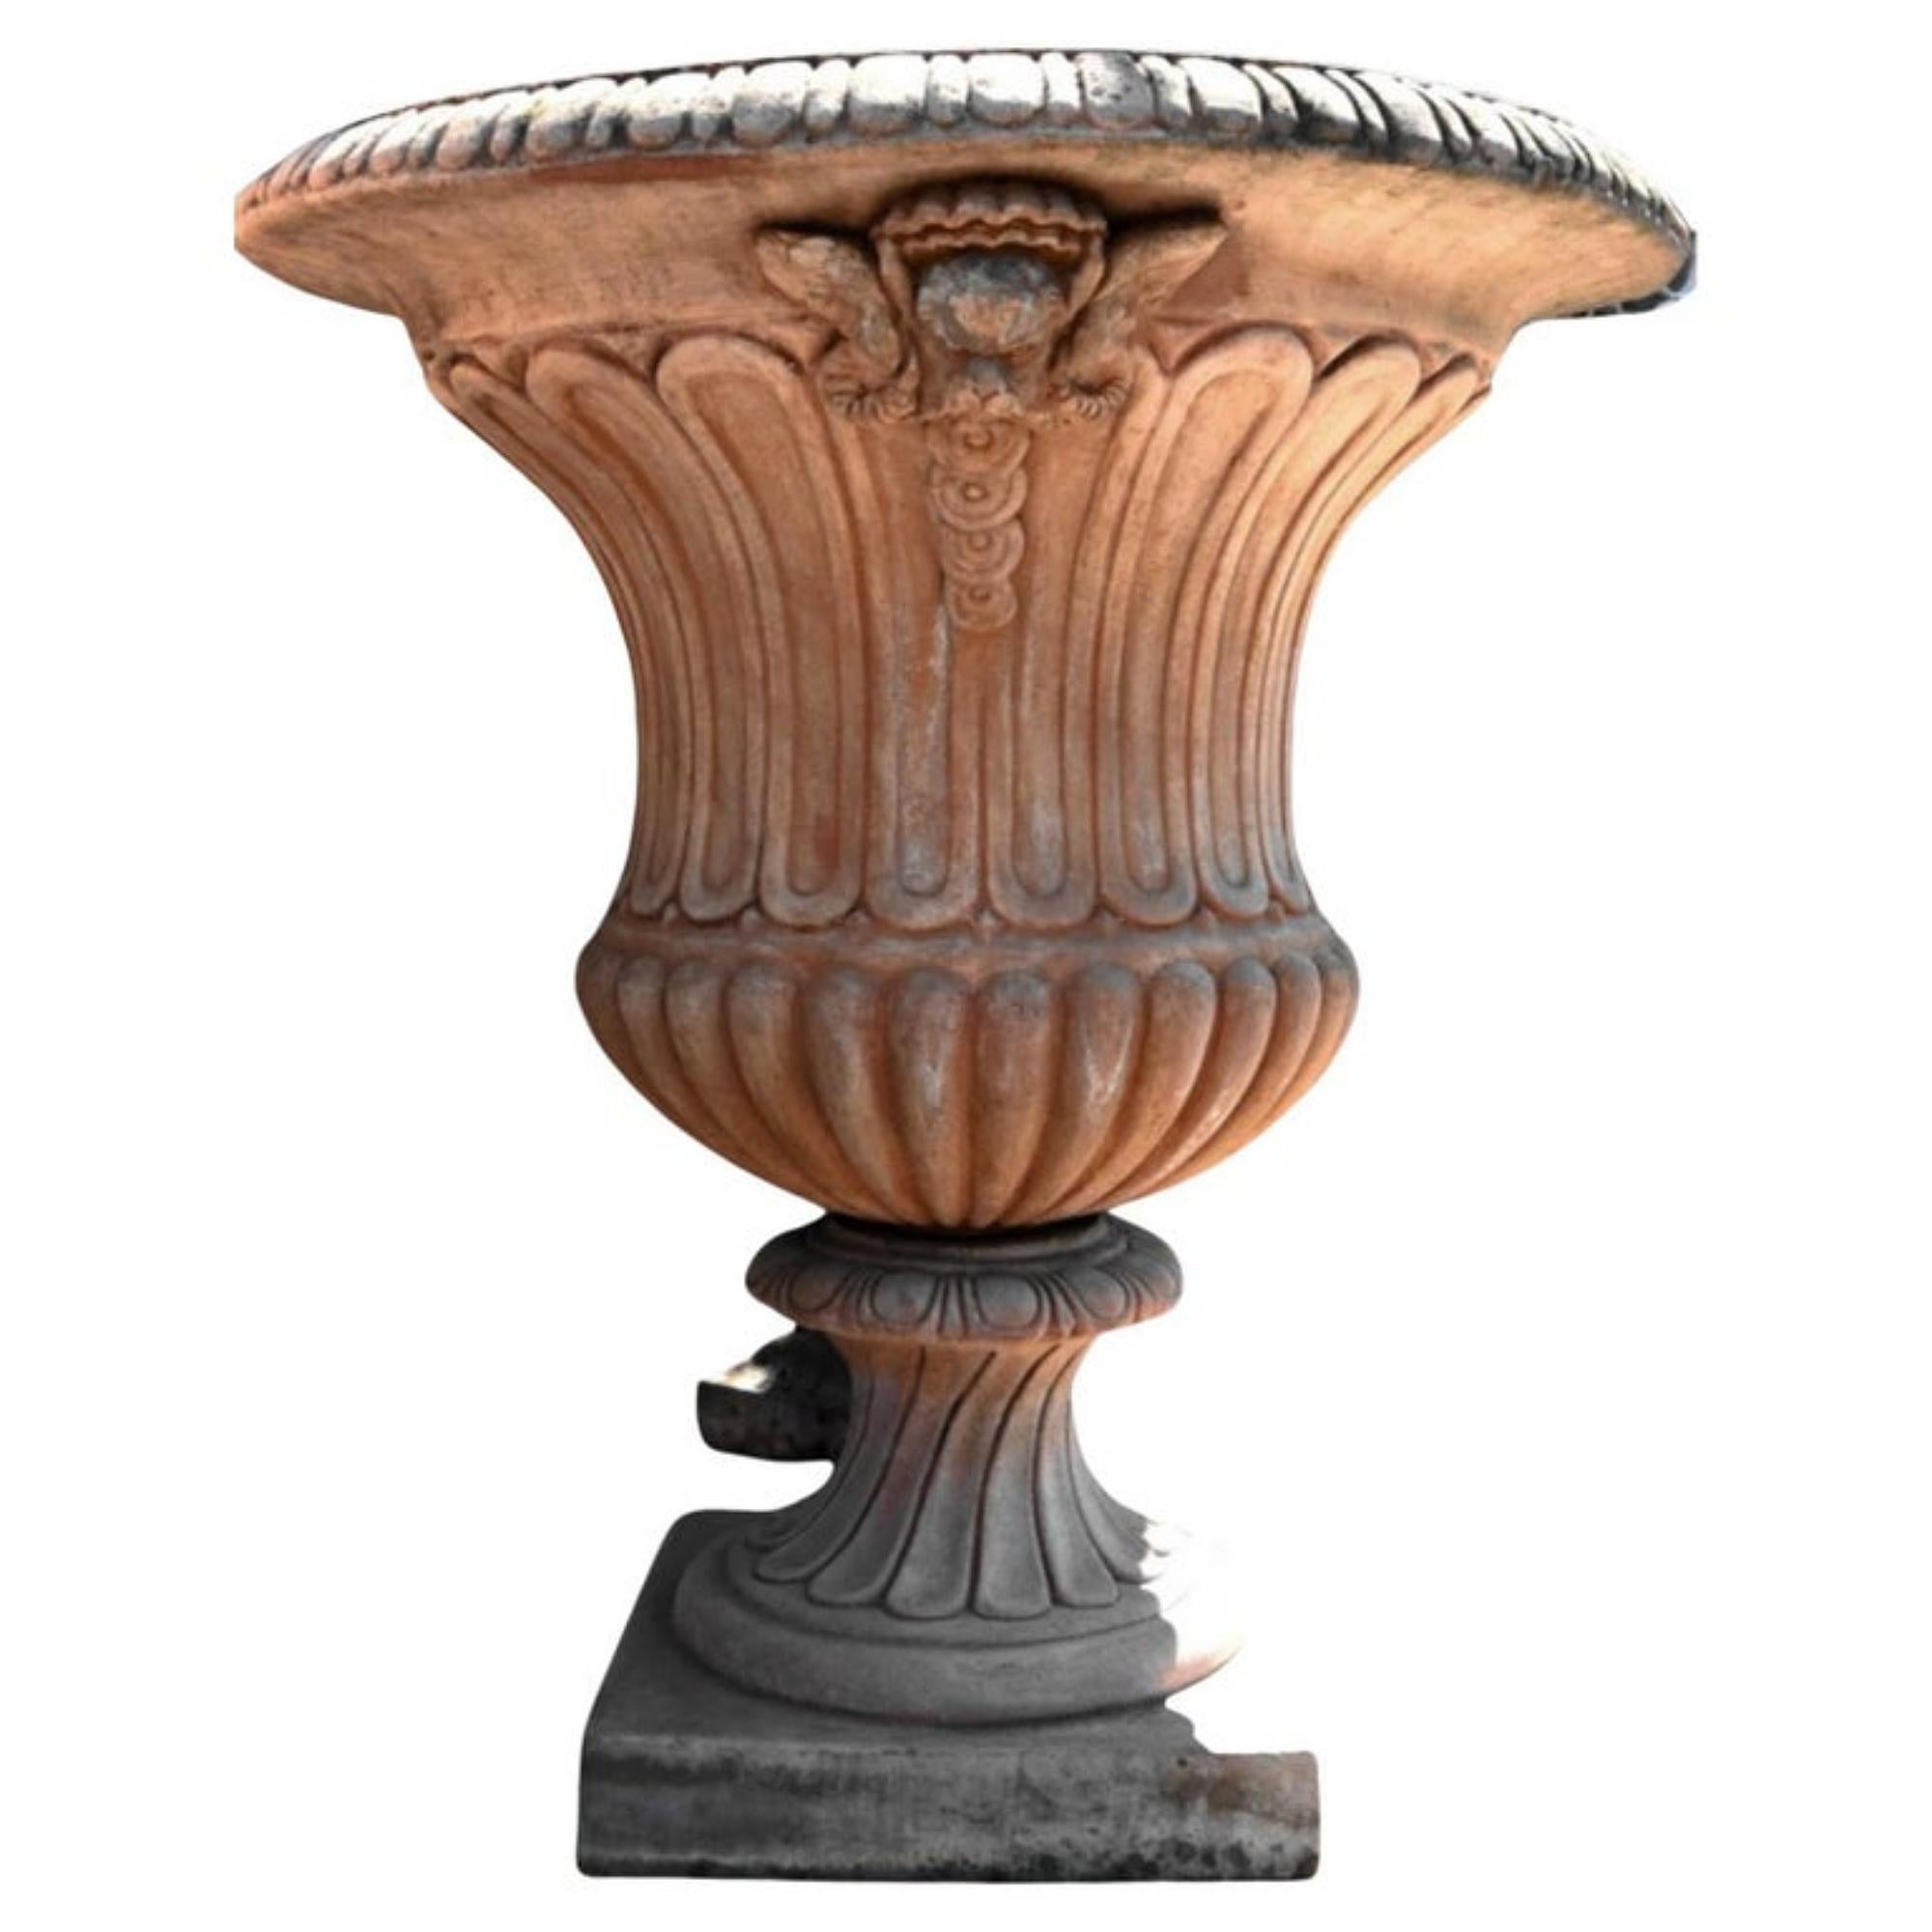 Hand-Crafted Large Mediceo Vase Baccellato Terracotta Goblet, Early 20th Century For Sale